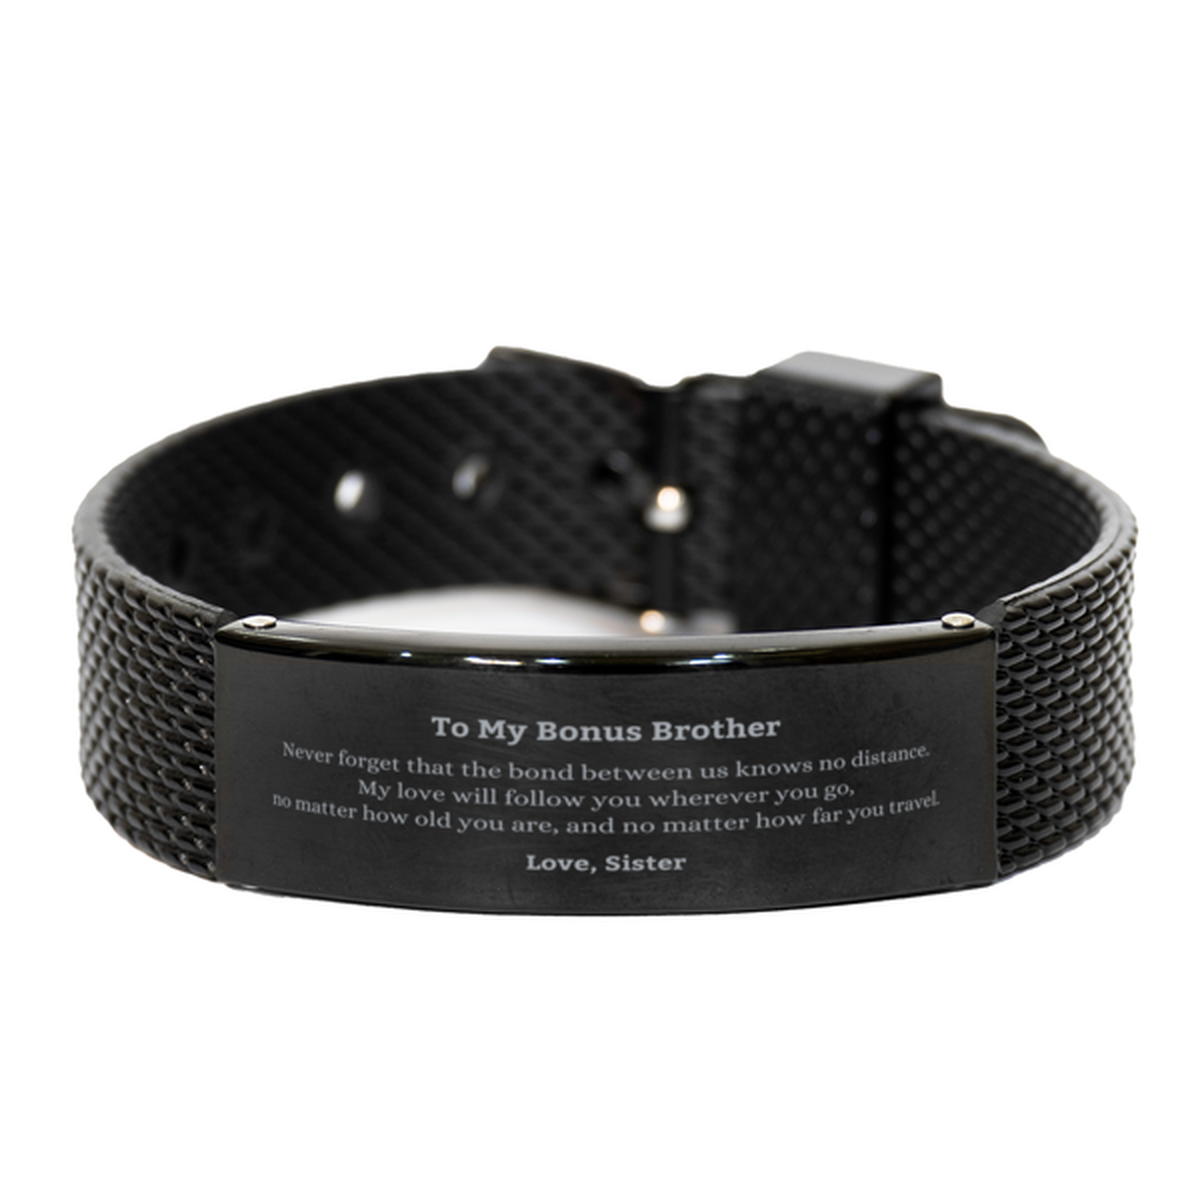 Bonus Brother Birthday Gifts from Sister, Adjustable Black Shark Mesh Bracelet for Bonus Brother Christmas Graduation Unique Gifts Bonus Brother Never forget that the bond between us knows no distance. Love, Sister